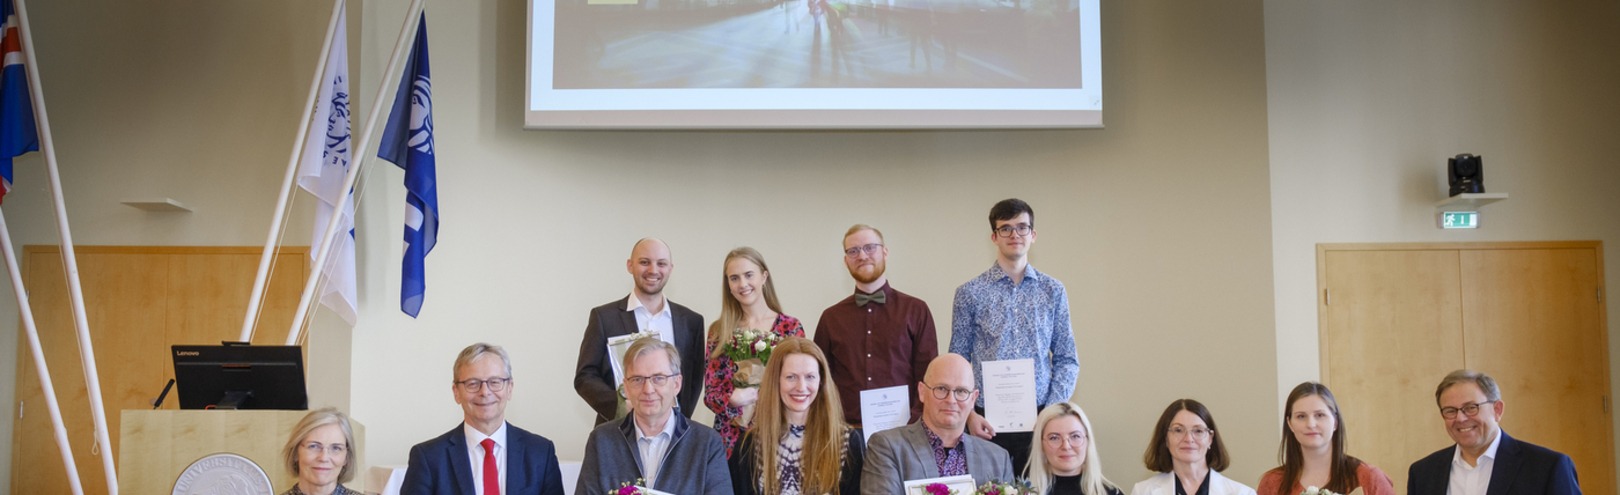 UI Science and Innovation Prize awarded to preventing infection in artificial joints - Available at University of Iceland